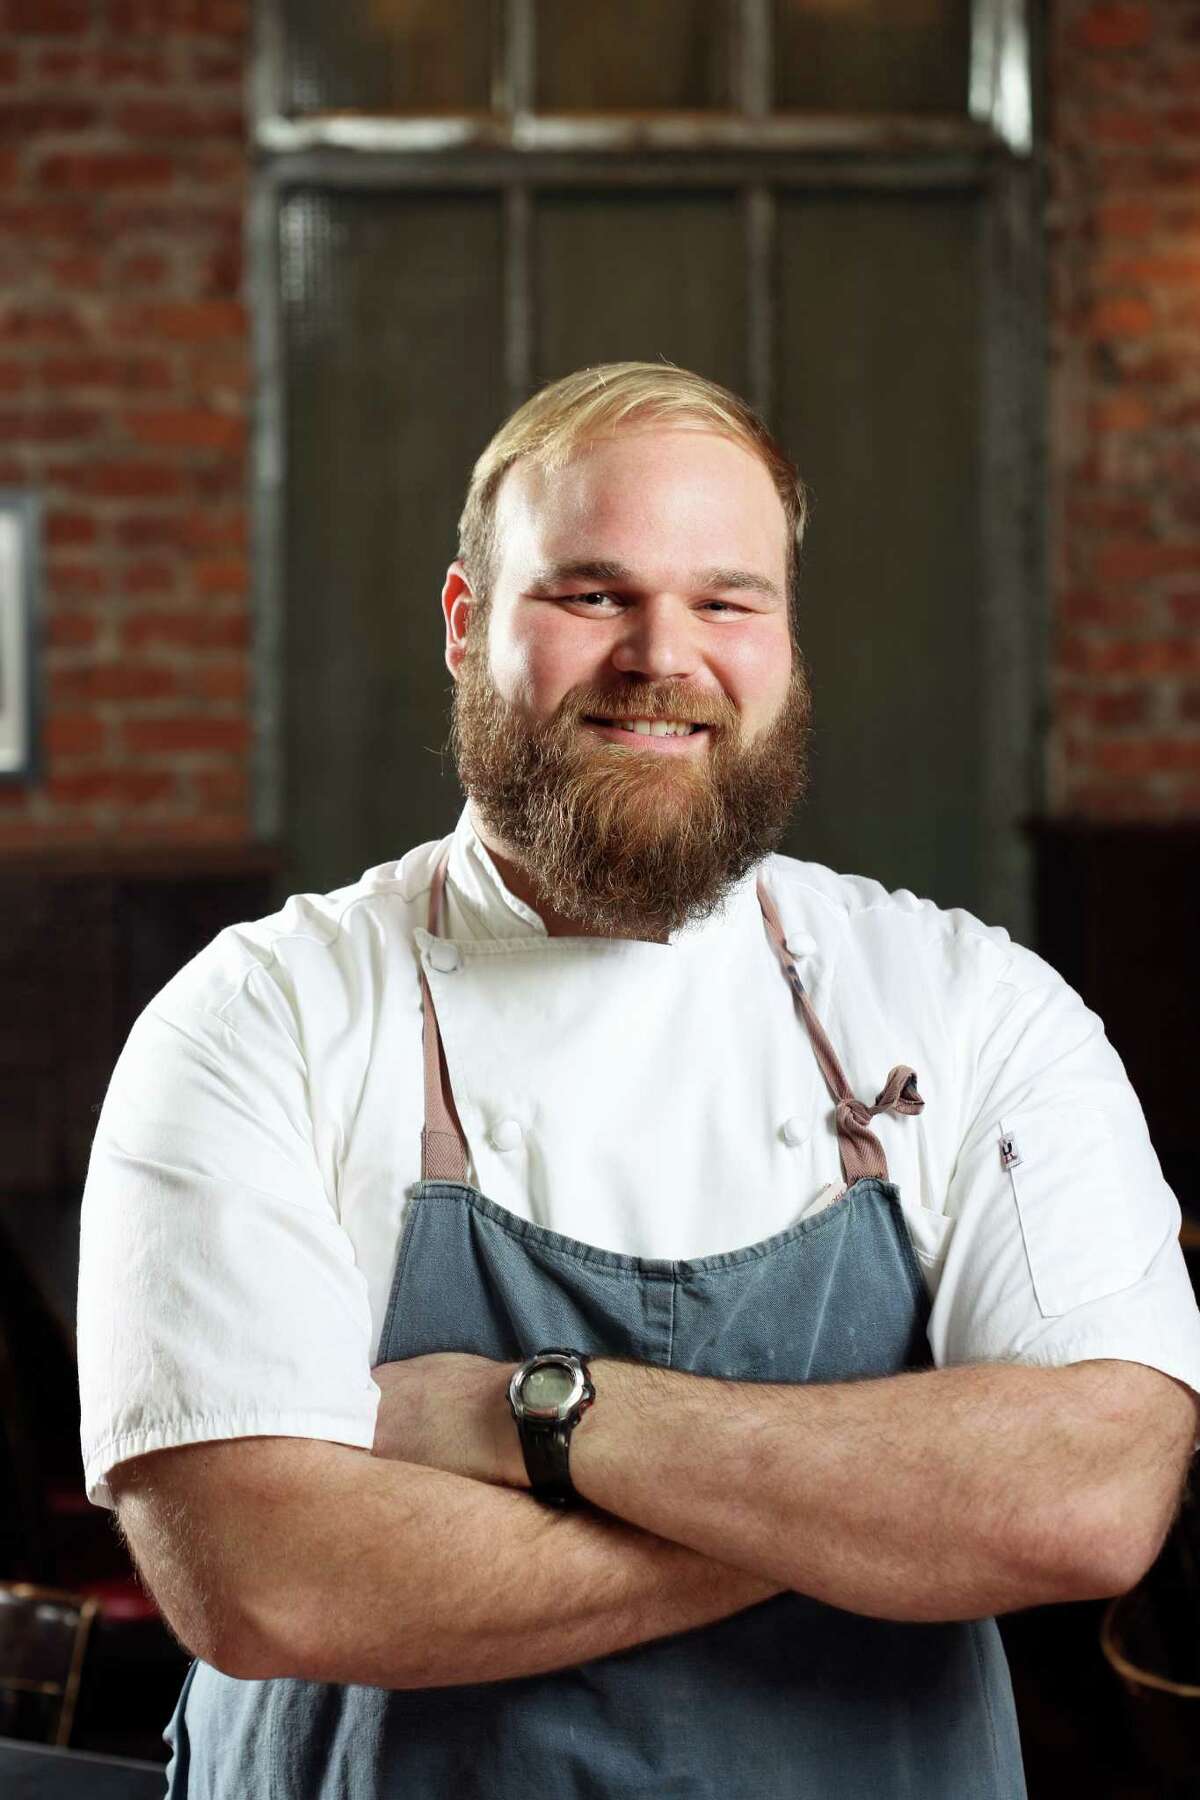 Chef/pitmaster Jean-Paul Bourgeois of Blue Smoke restaurant gives New Yorkers a taste of barbecue and Cajun cuisine.